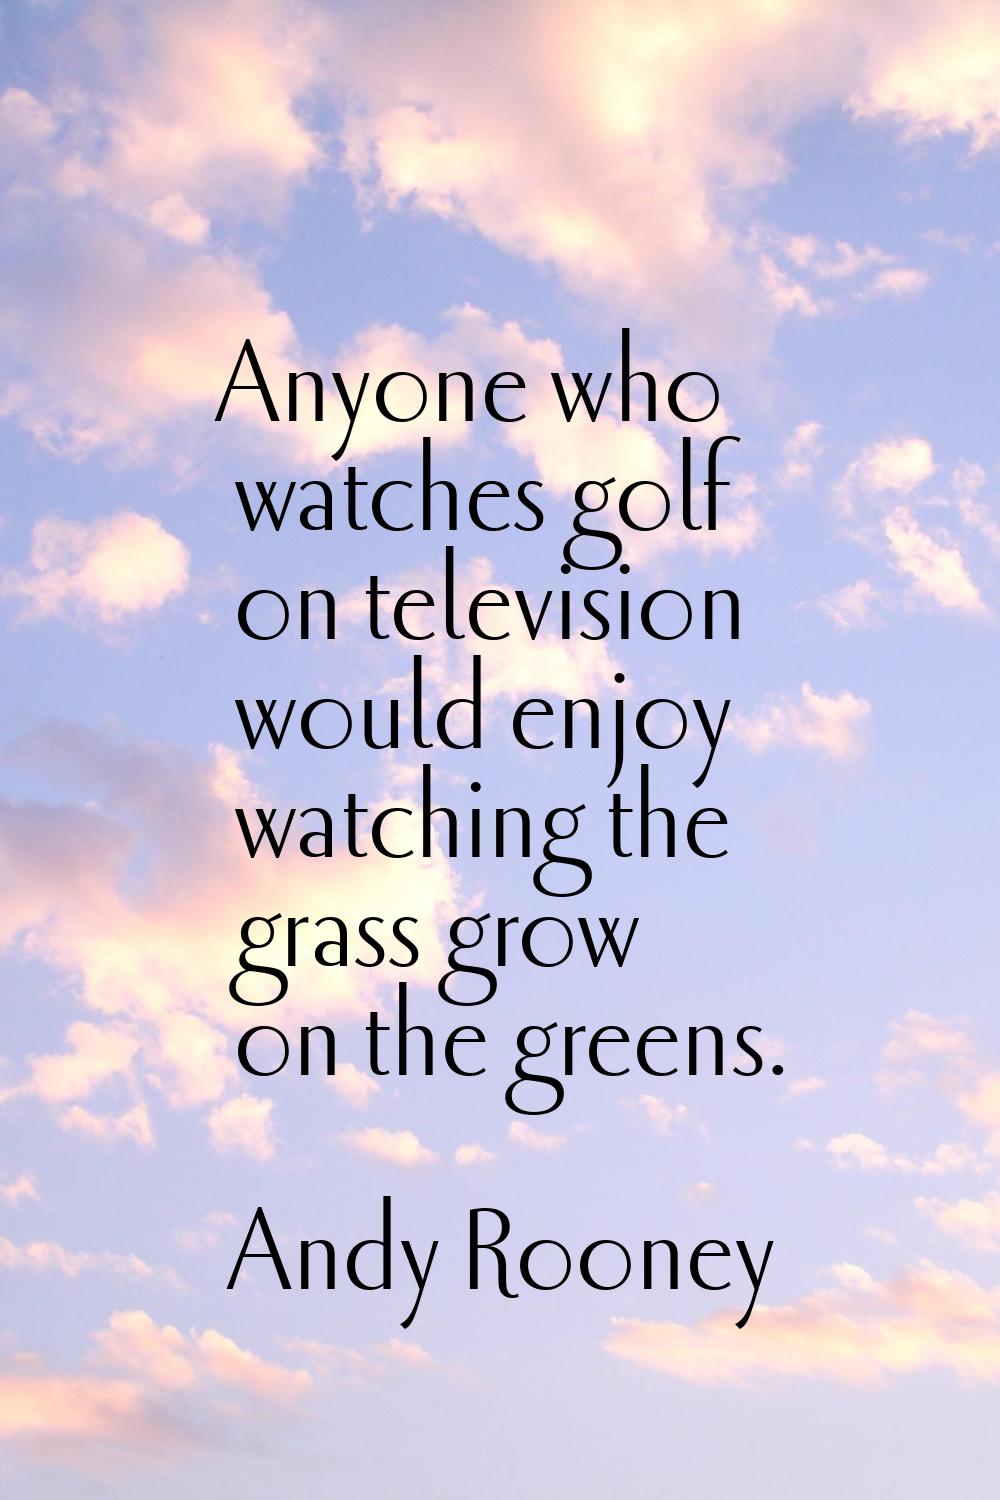 Anyone who watches golf on television would enjoy watching the grass grow on the greens.